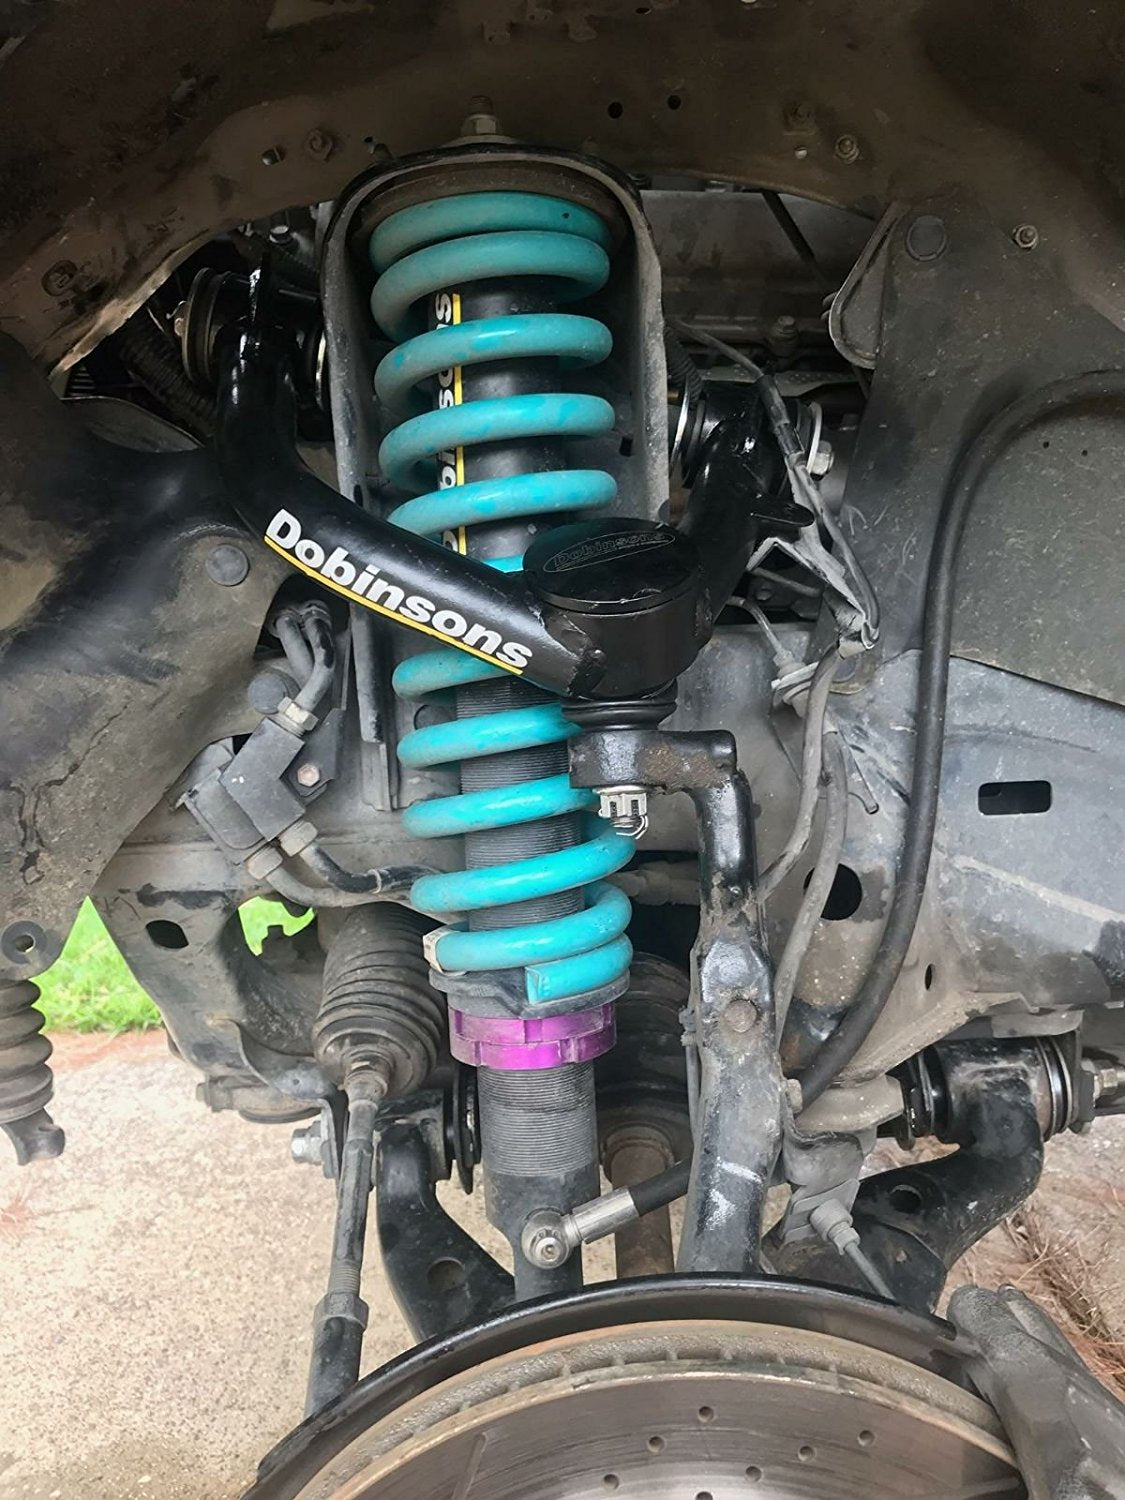 total chaos control arms 4runner